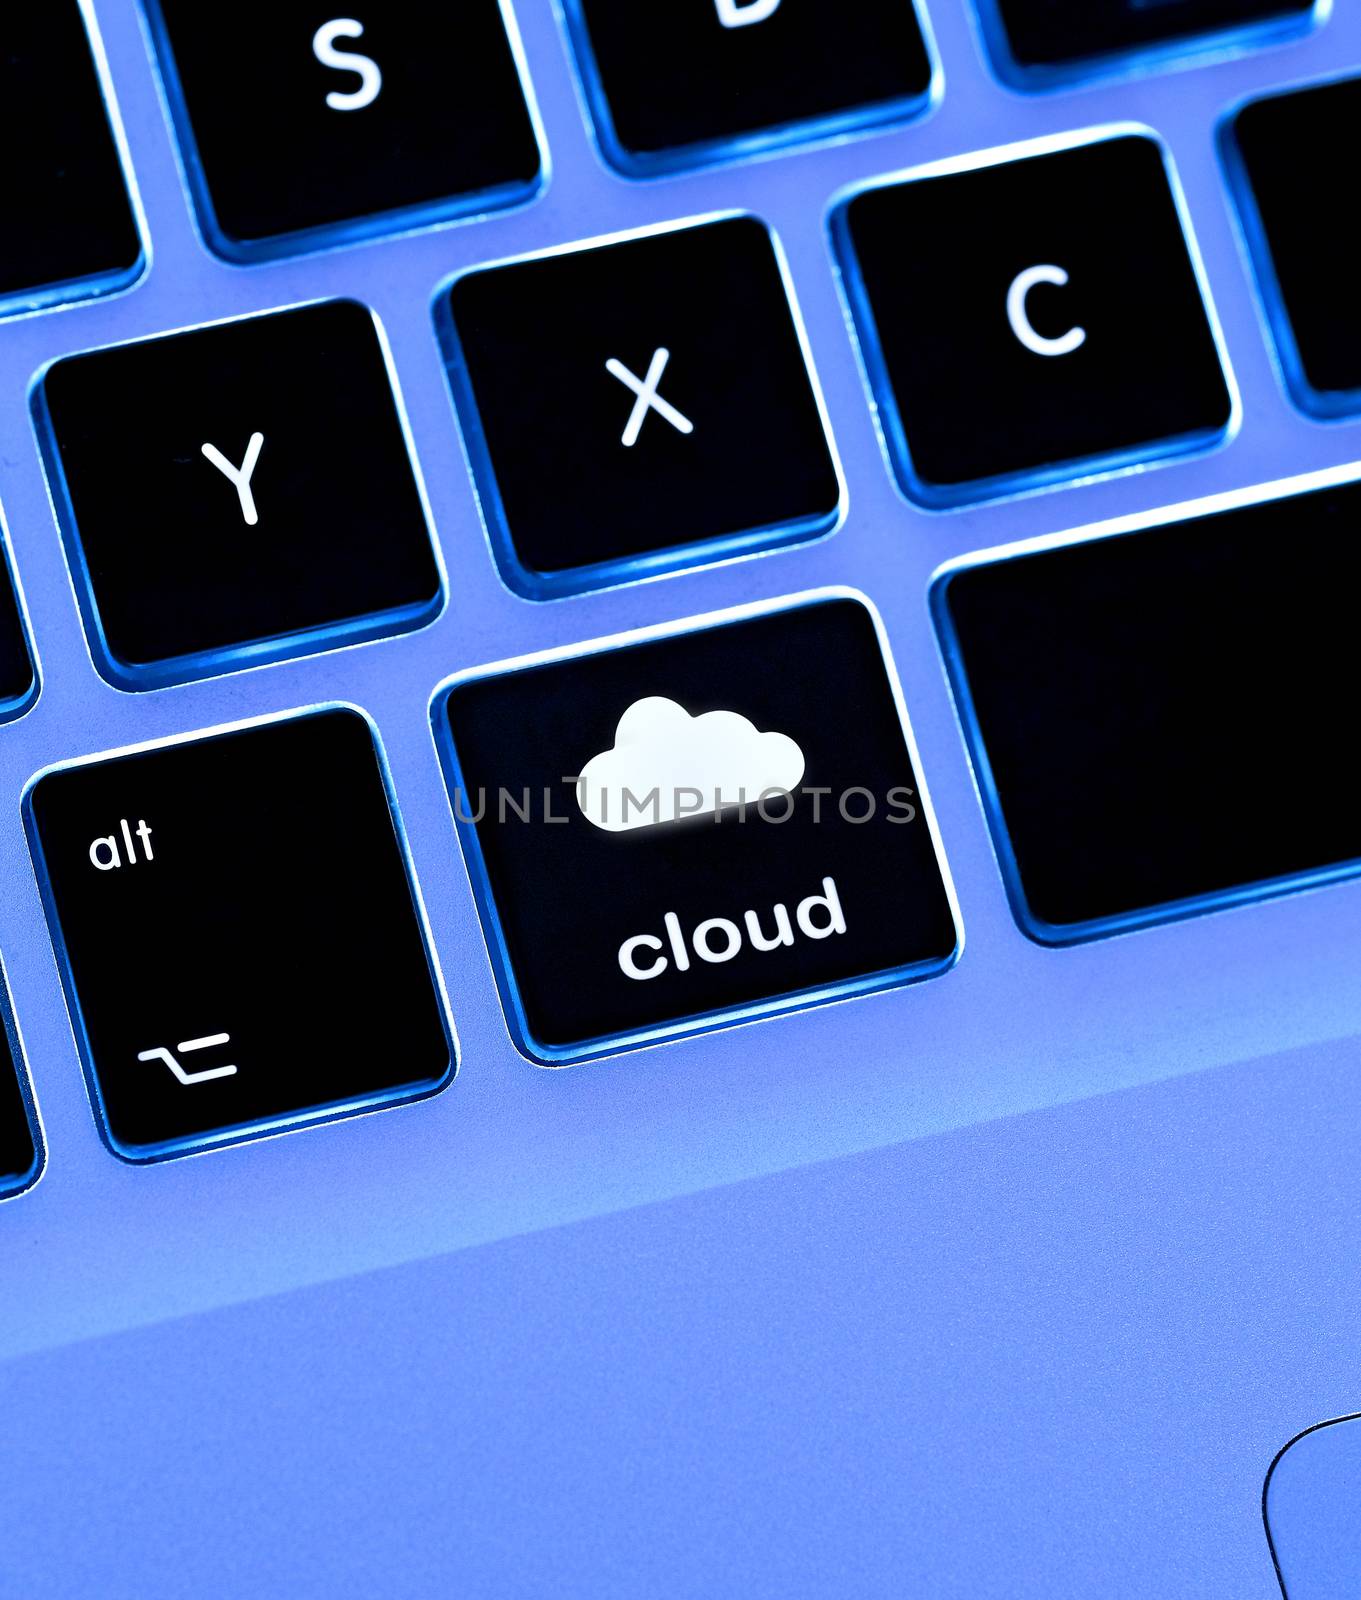 keyboard layout for cloud computing {super high resolution/shot with PhaseOne P45}